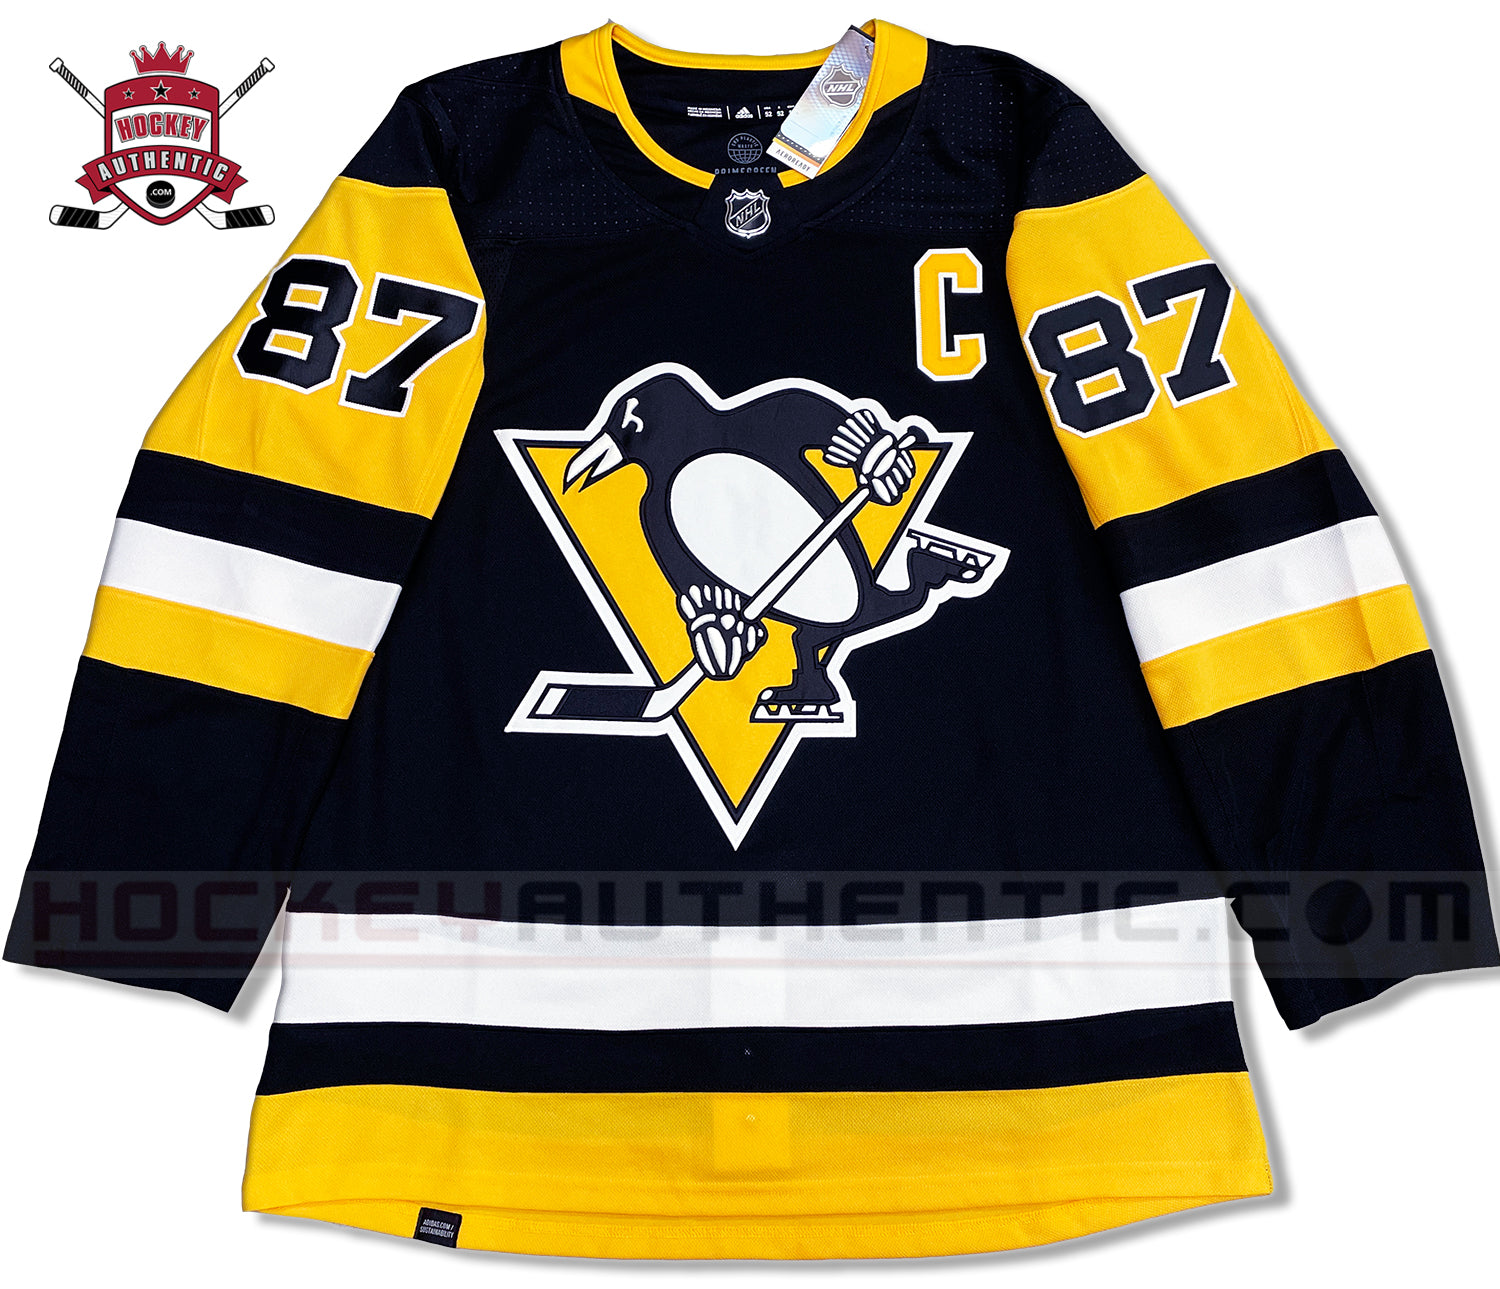 Adidas Authentic Pittsburgh Penguins Jake Guentzel Jersey